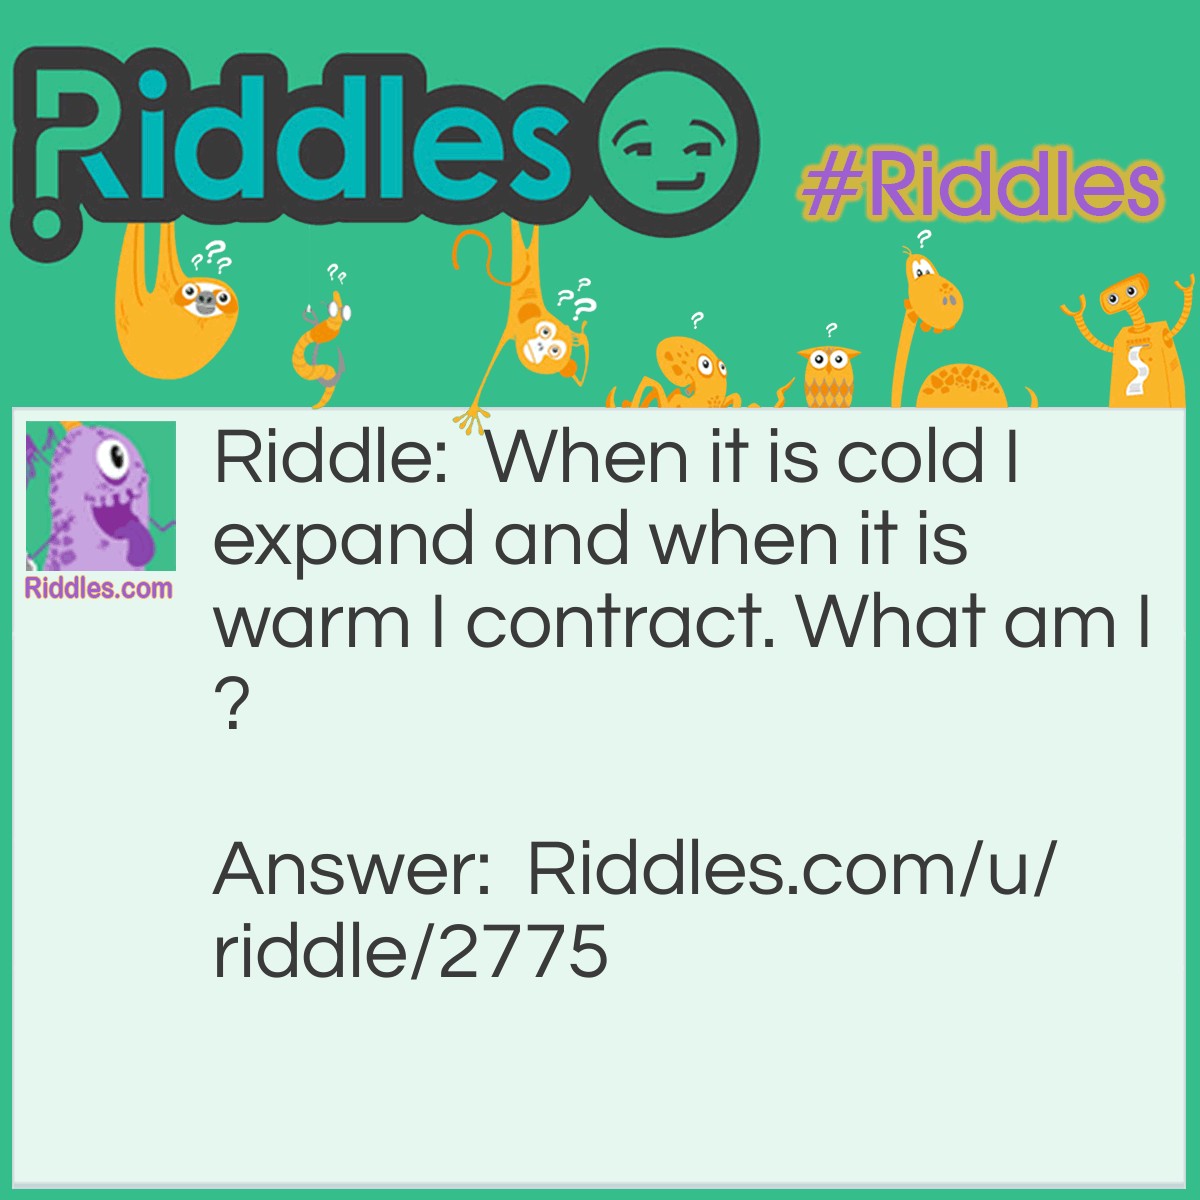 Riddle: When it is cold I expand and when it is warm I contract. What am I? Answer: Water/ice.